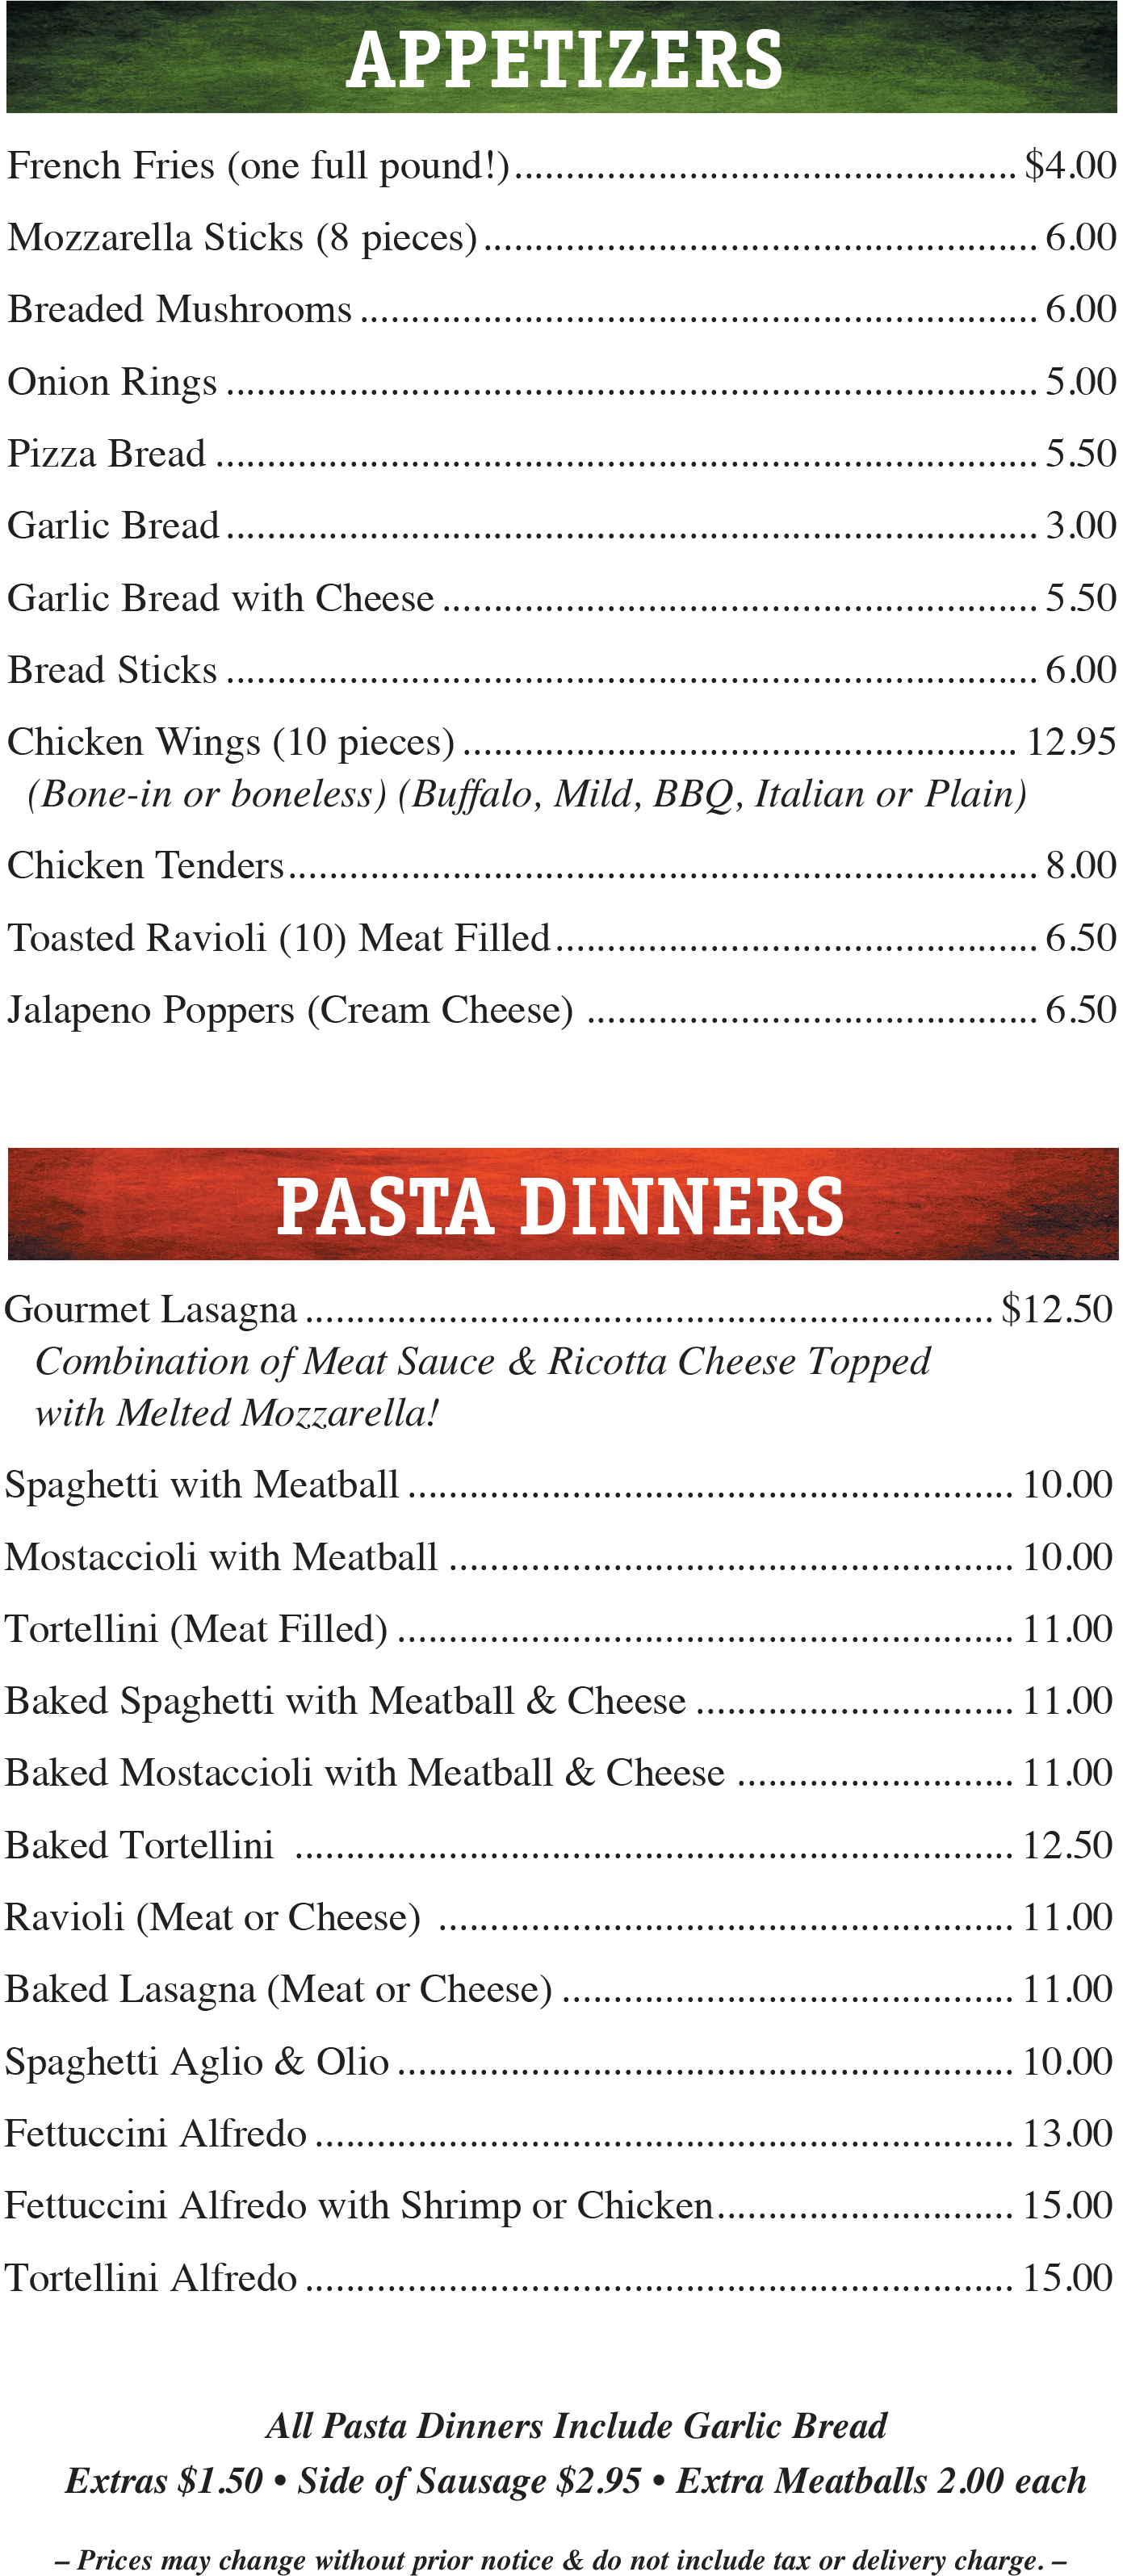 Machesney Park appetizers and pasta dinners menu